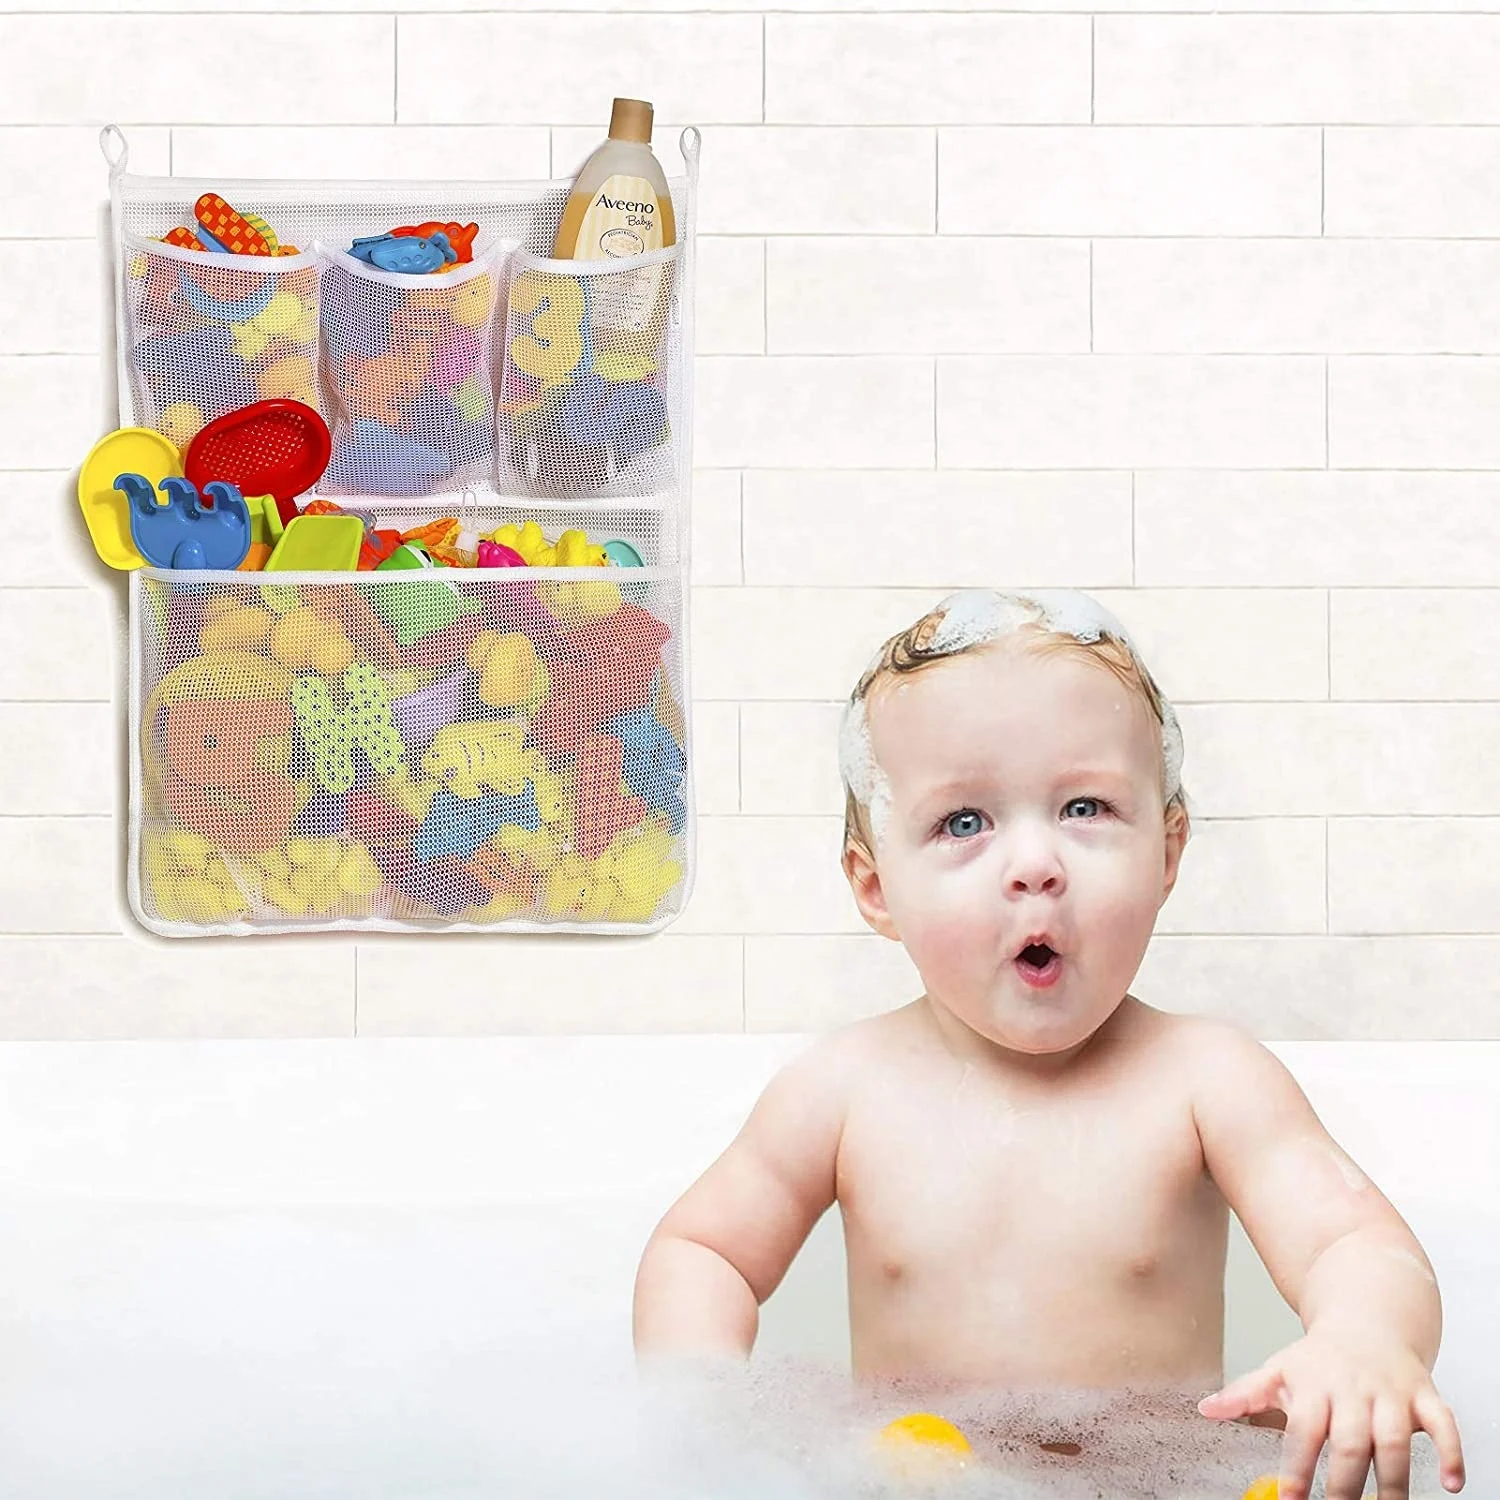 

Baby Shower Bath Toys White Baby Kids Toy Storage Mesh with Strong Suction Cups Toy Bag Net Bathroom Organizer